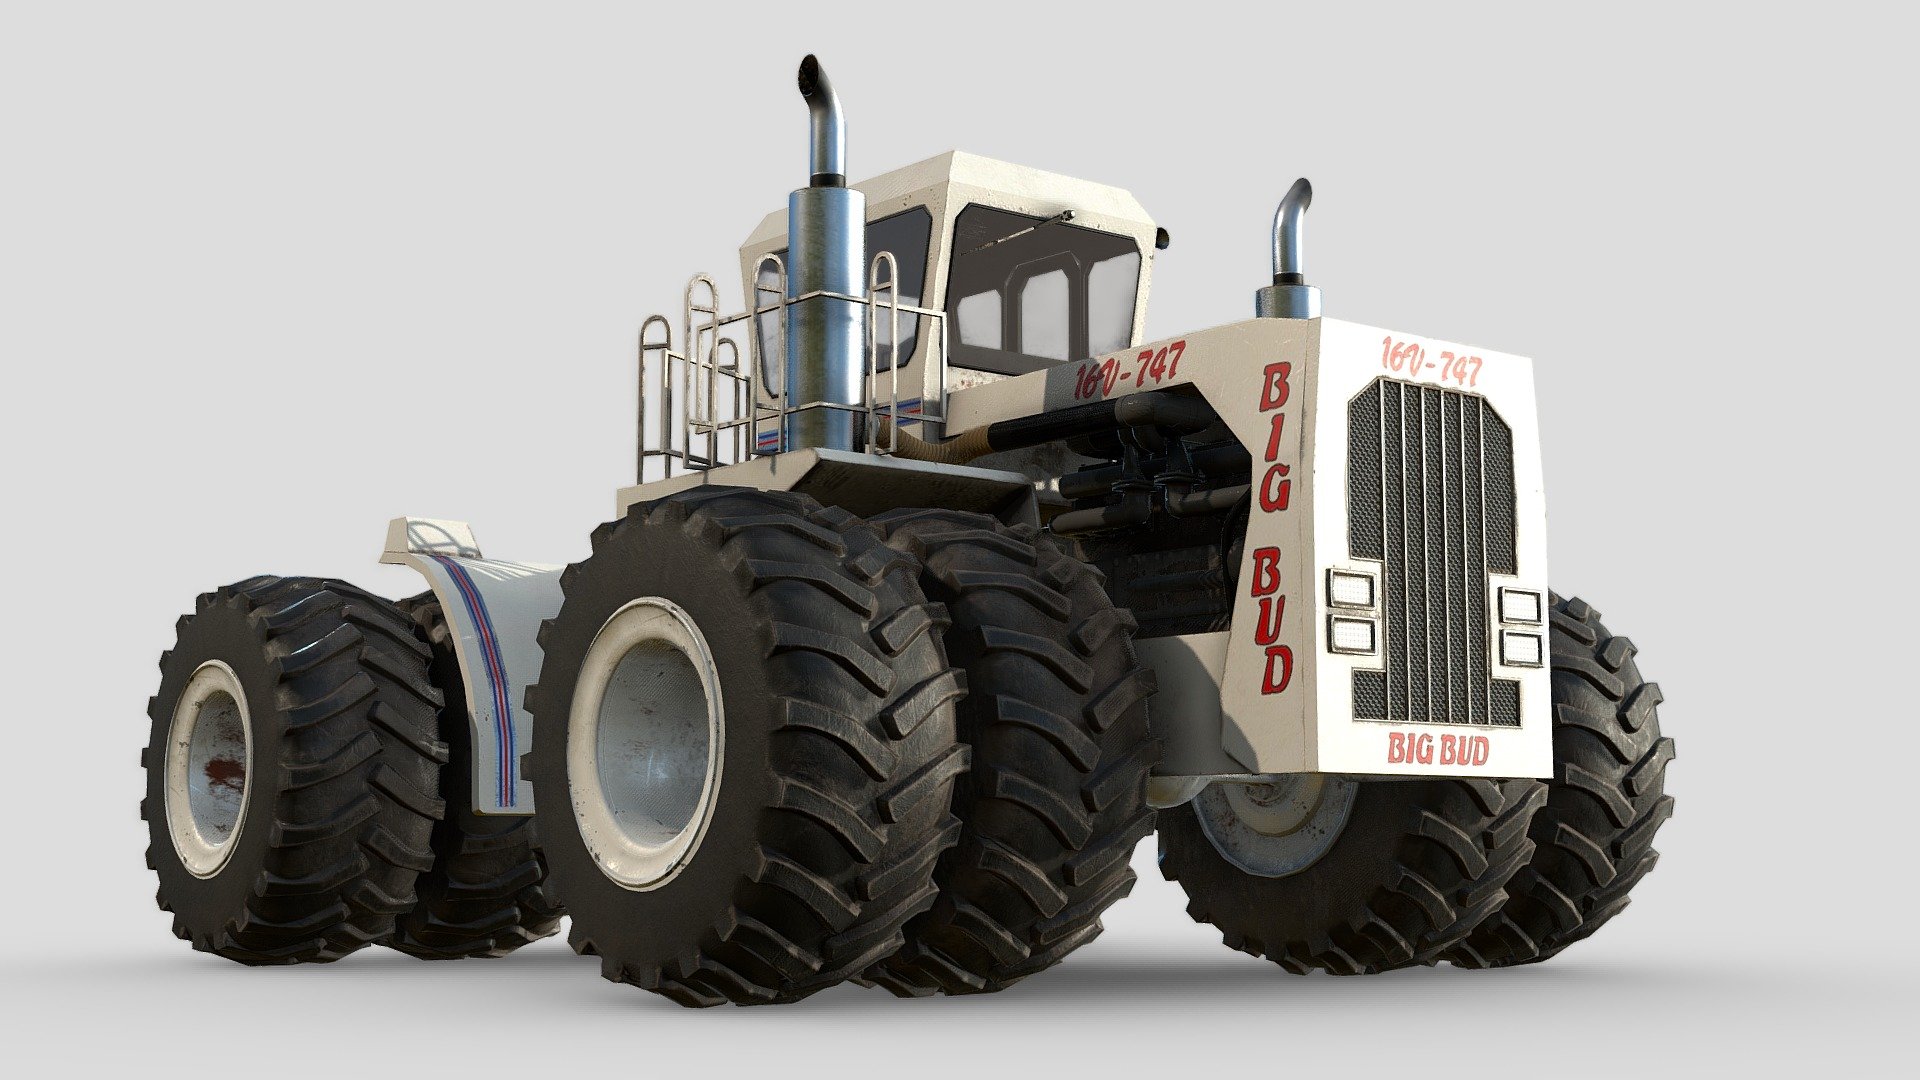 The Big Bud 747, the largest tractor in the world. 

Created in Maya, textured with Substance Painter. 

The model materials are broken up into 5 different peices with Cabin, Body, Wheels, Engine and Glass with their own unwrapped and UV'd textures. 
Textures are 4096x4096 - Big Bud 747 Tractor - Buy Royalty Free 3D model by Mike Nixon (@MichaelNixon) 3d model